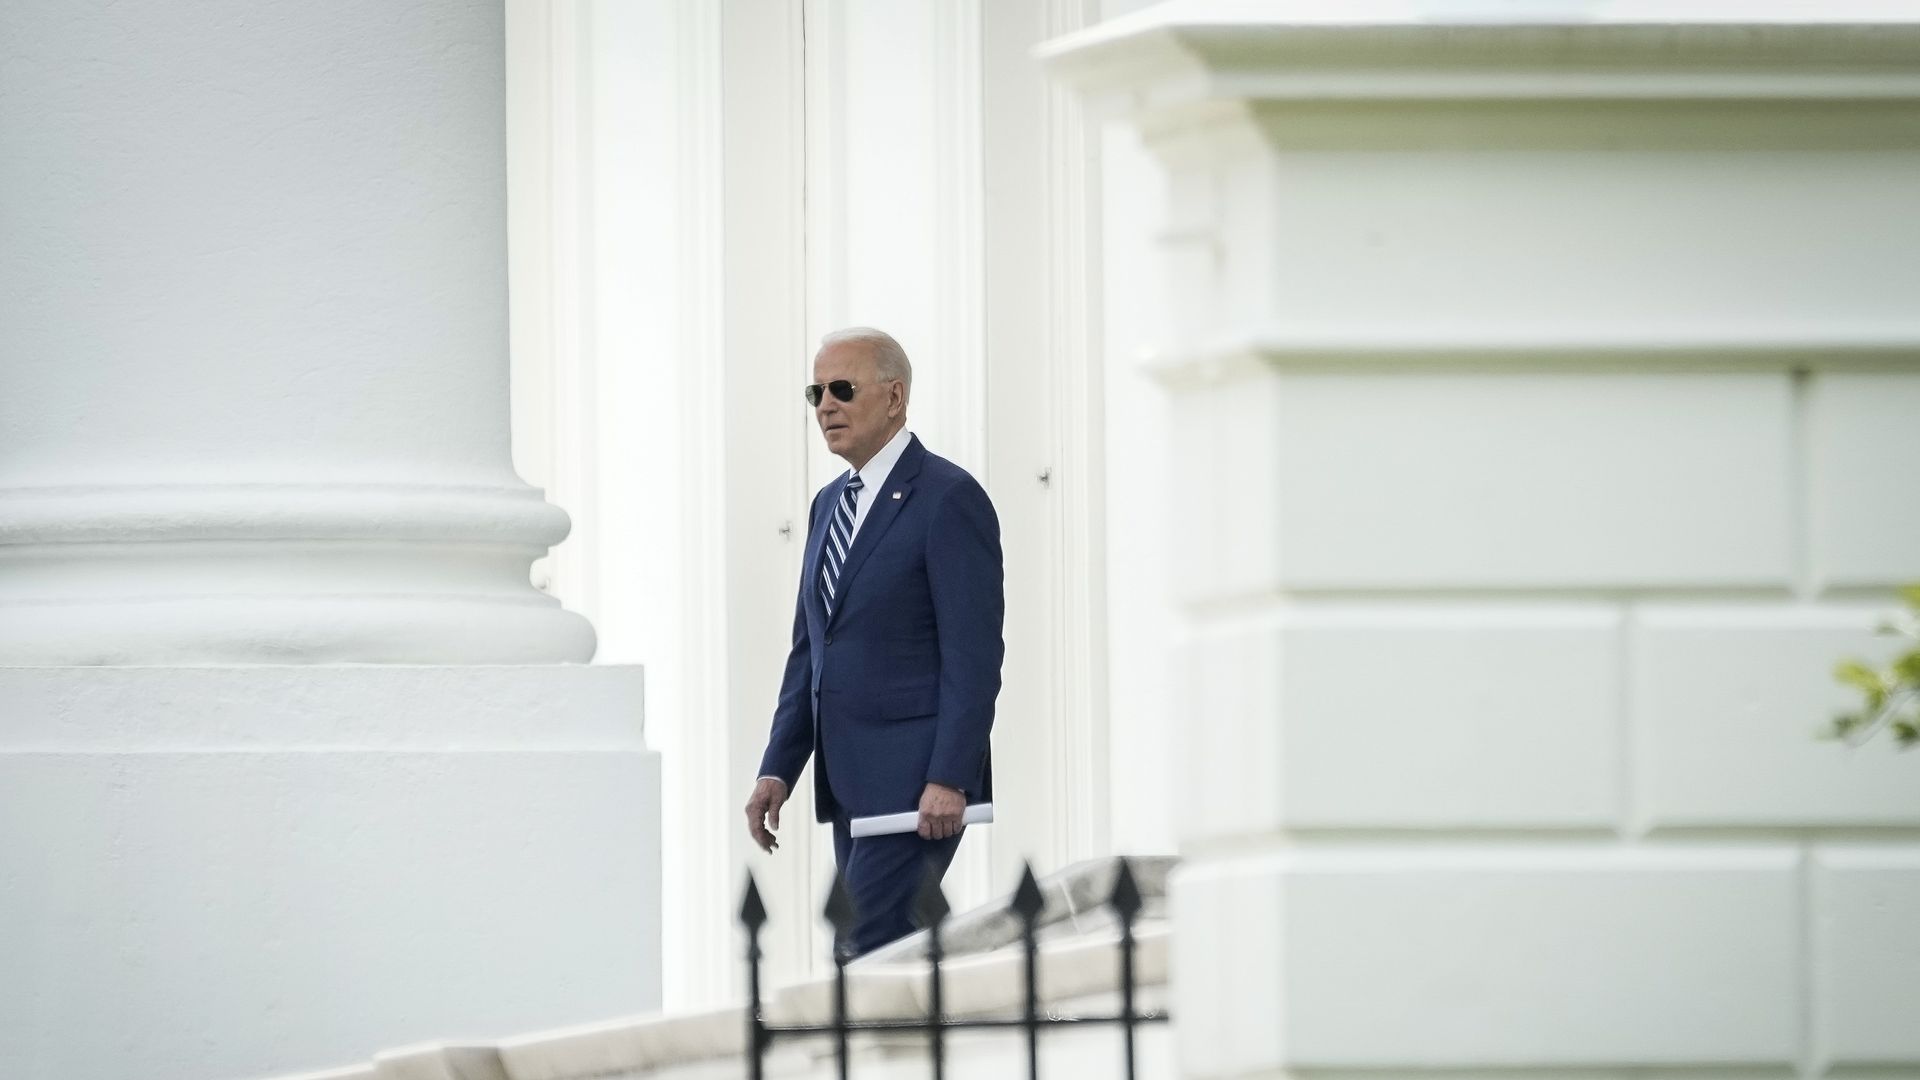 Biden walks out of the White House